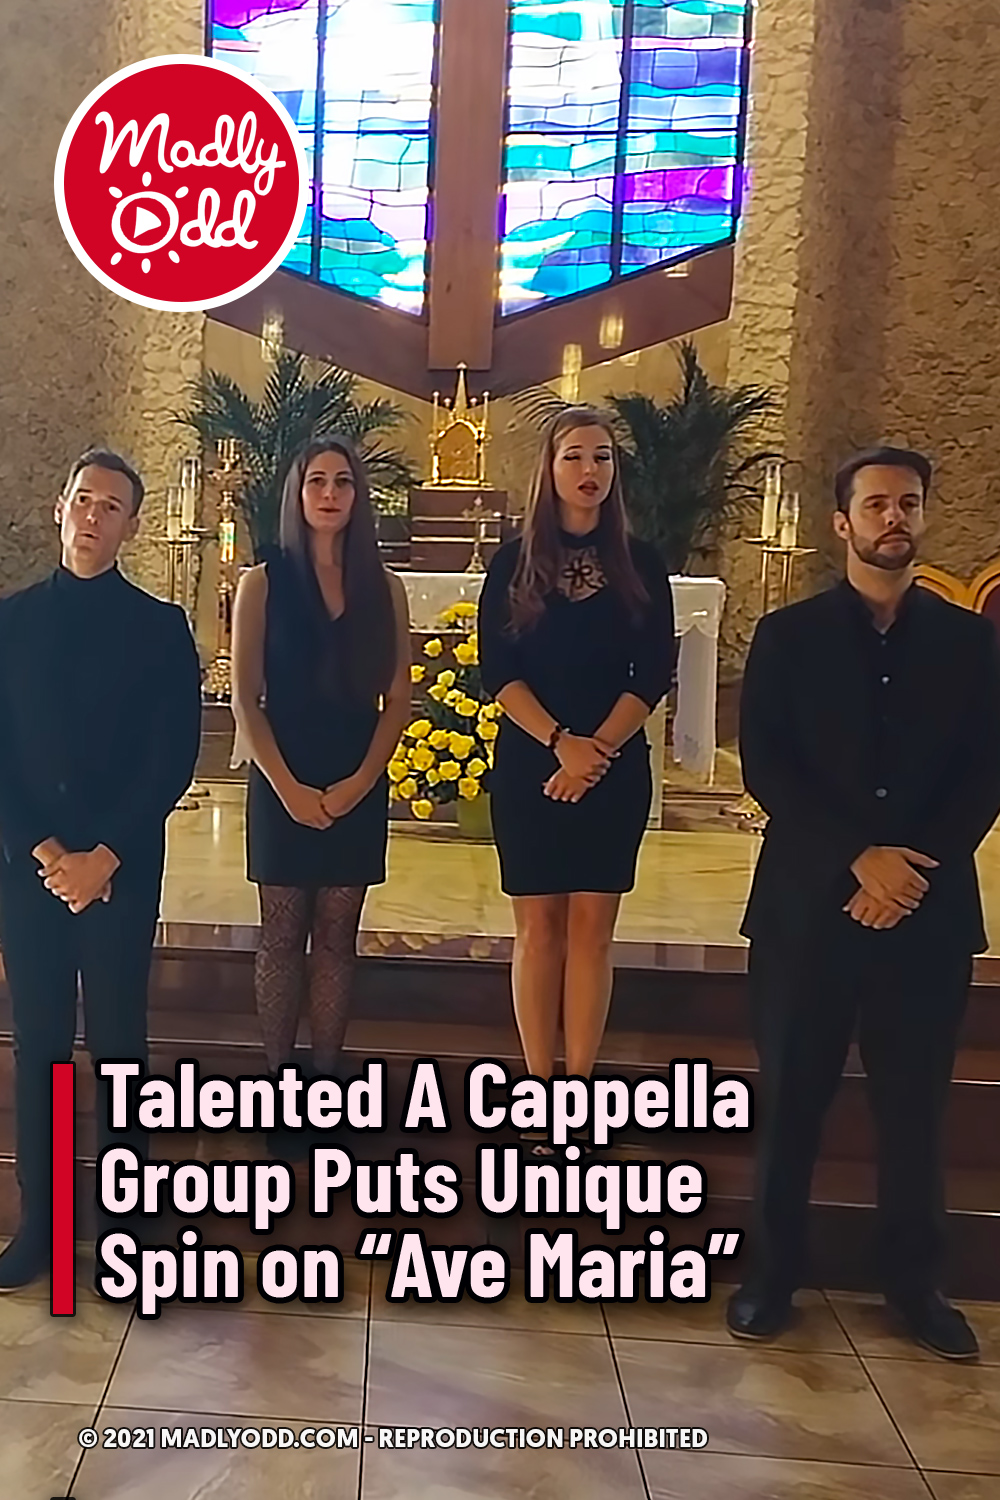 Talented A Cappella Group Puts Unique Spin on “Ave Maria”